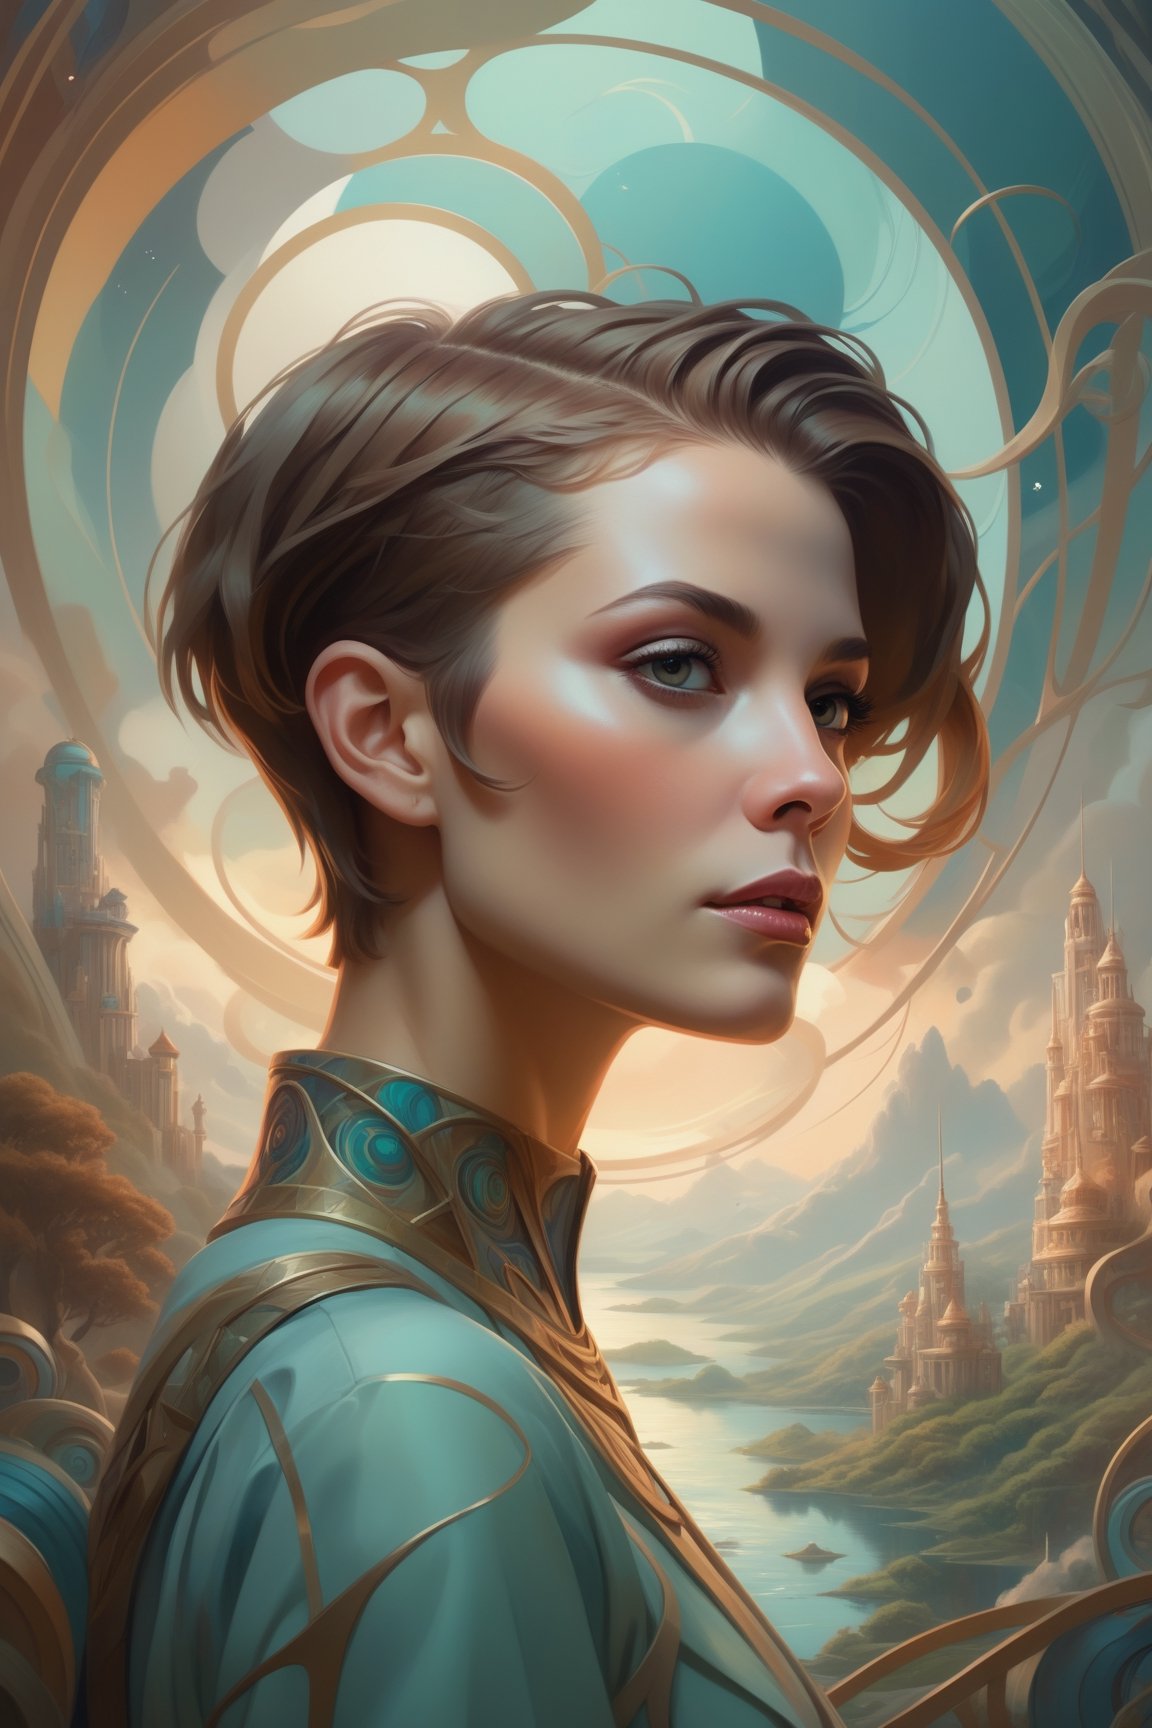 In the style of Peter Mohrbacher, create an eye-catching poster featuring a close up of a woman with short hair, set in a serene and surreal wonderland filled with advanced technology, enveloped by abstract color patterns that add to the overall dreamlike effect.